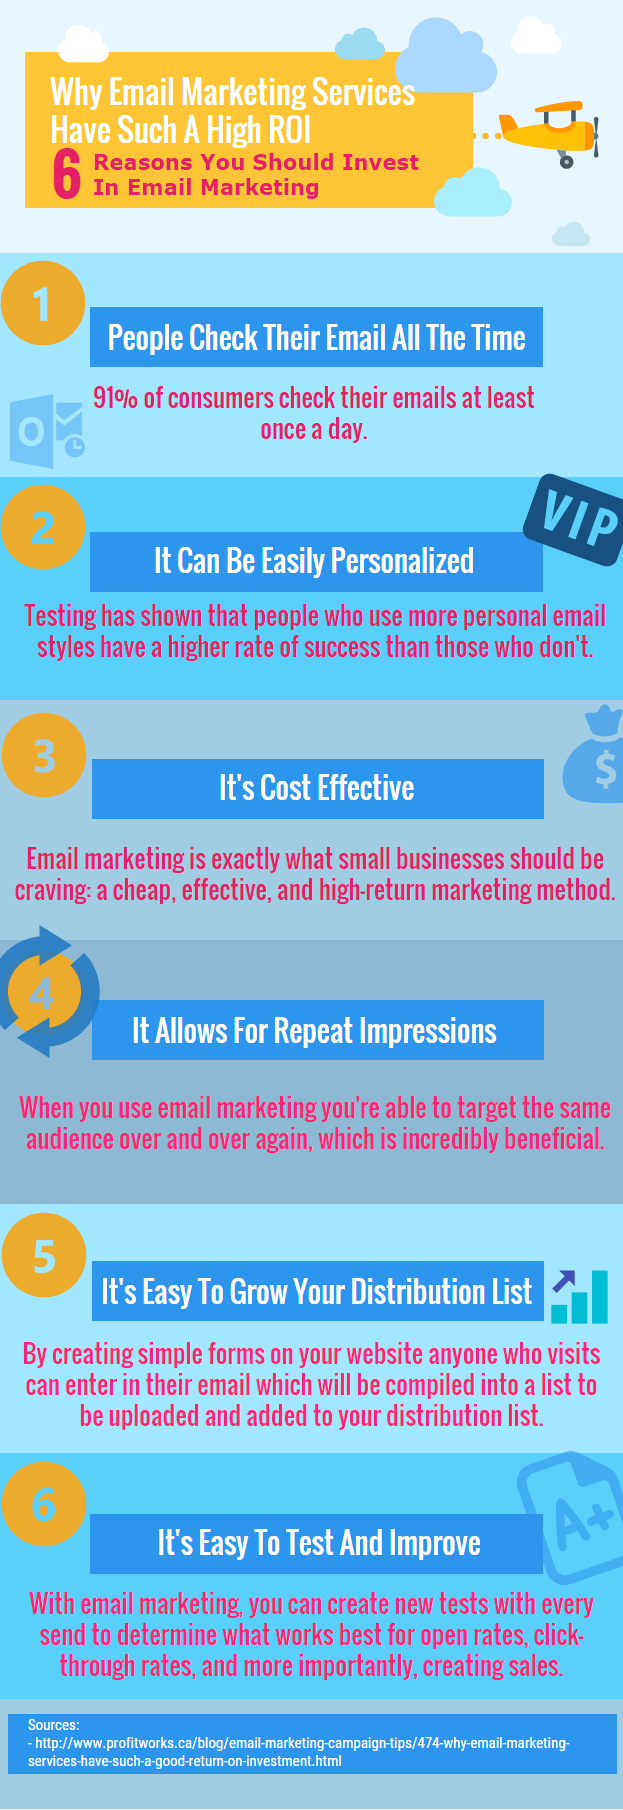 Email Marketing High ROI infographic